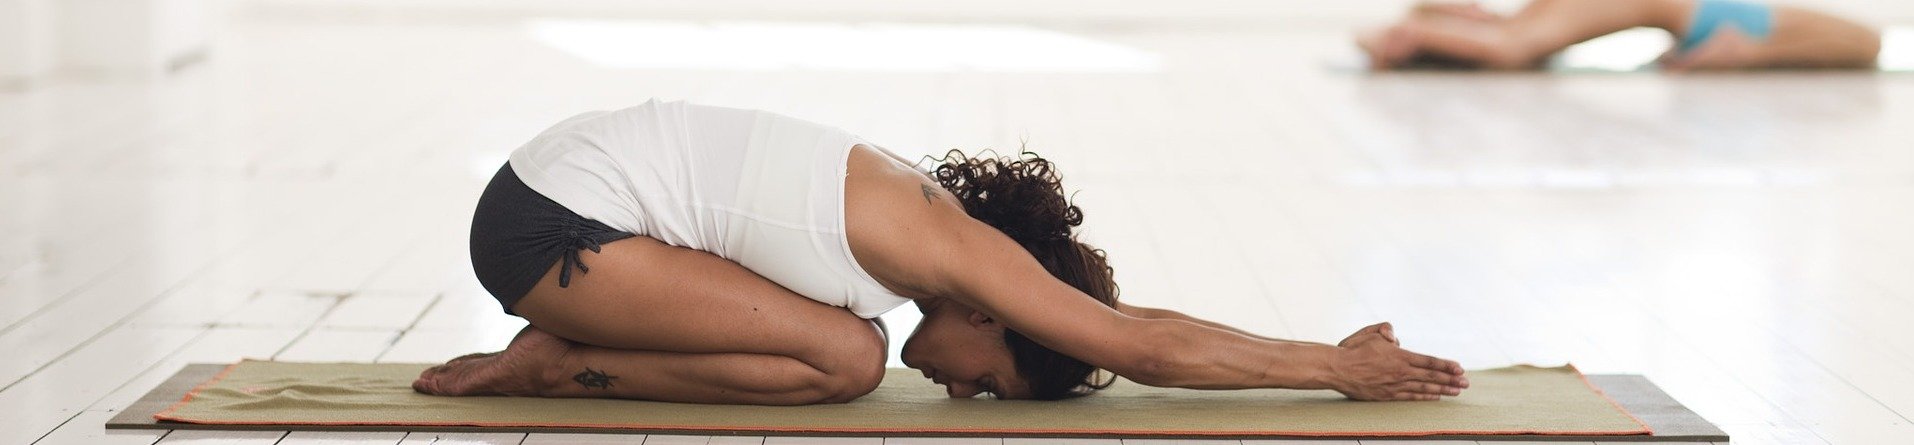 10 Ways to Avoid Your Body’s Limitations & Yoga Injuries